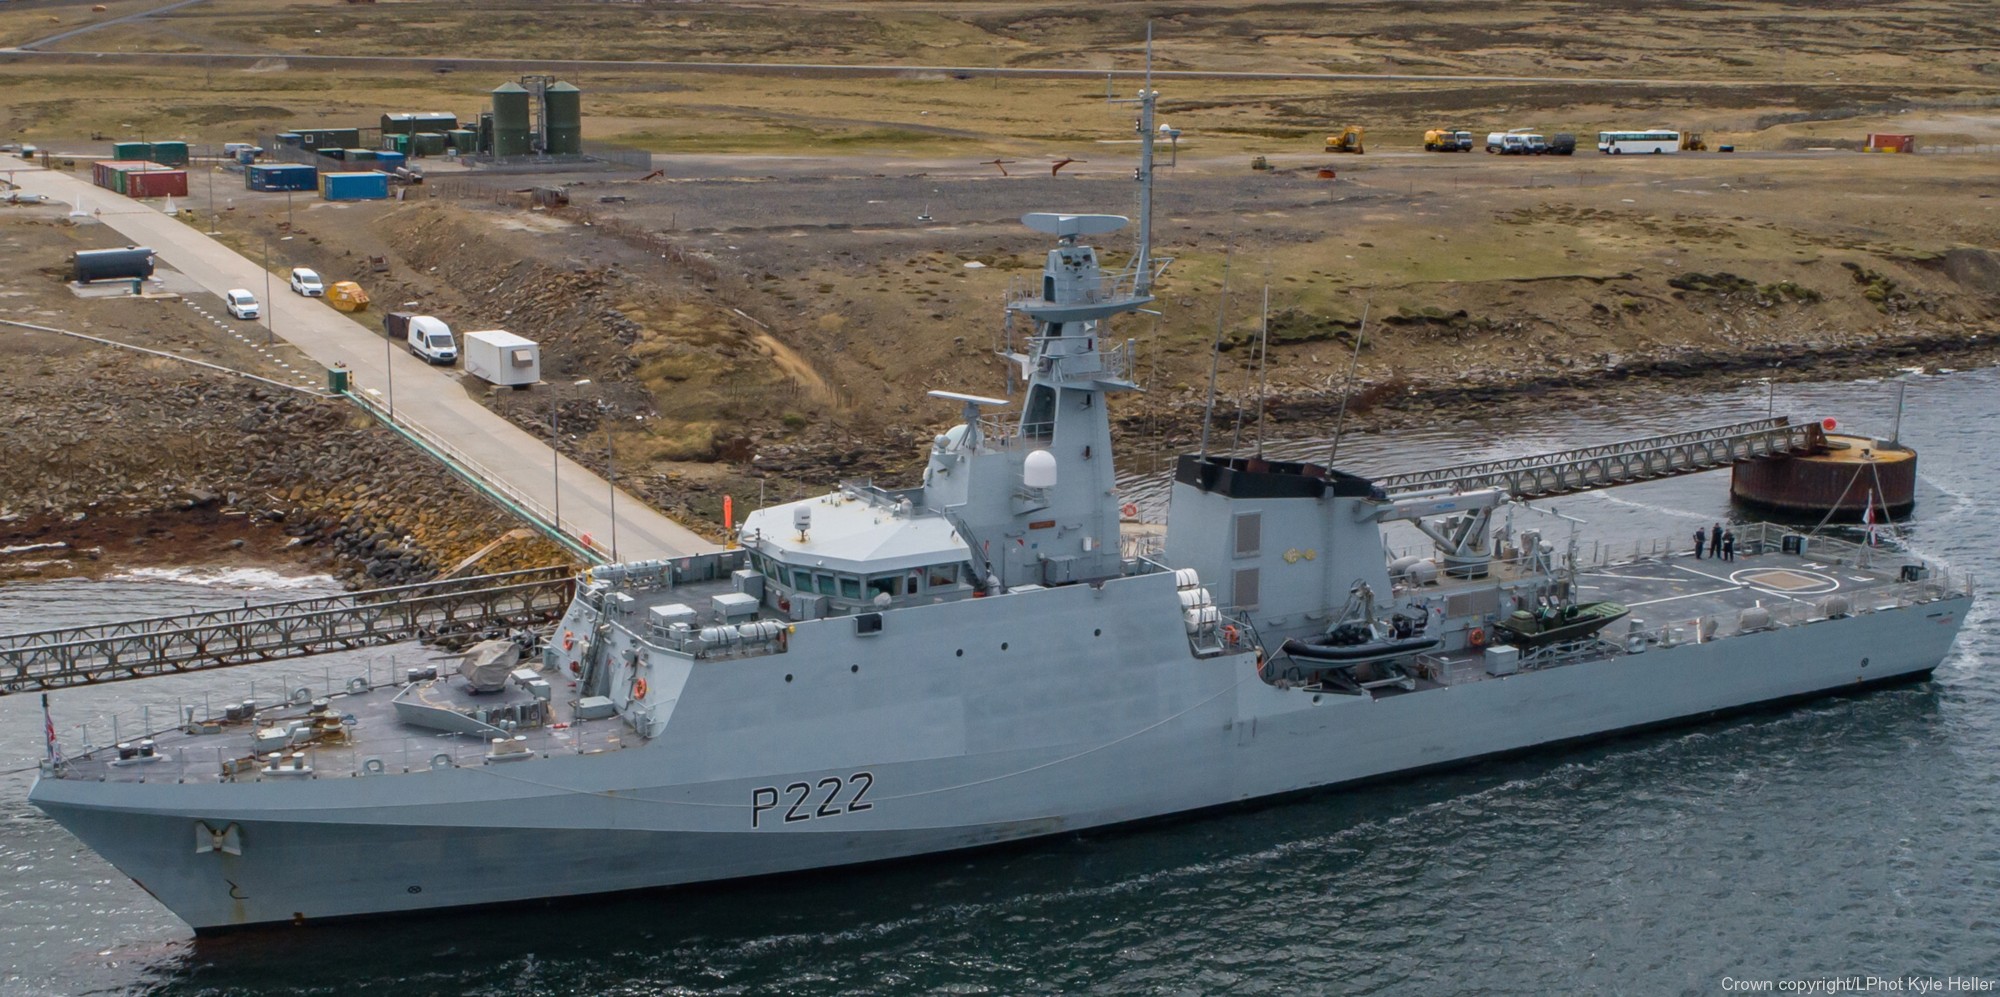 p222 hms forth river class offshore patrol vessel opv royal navy 29